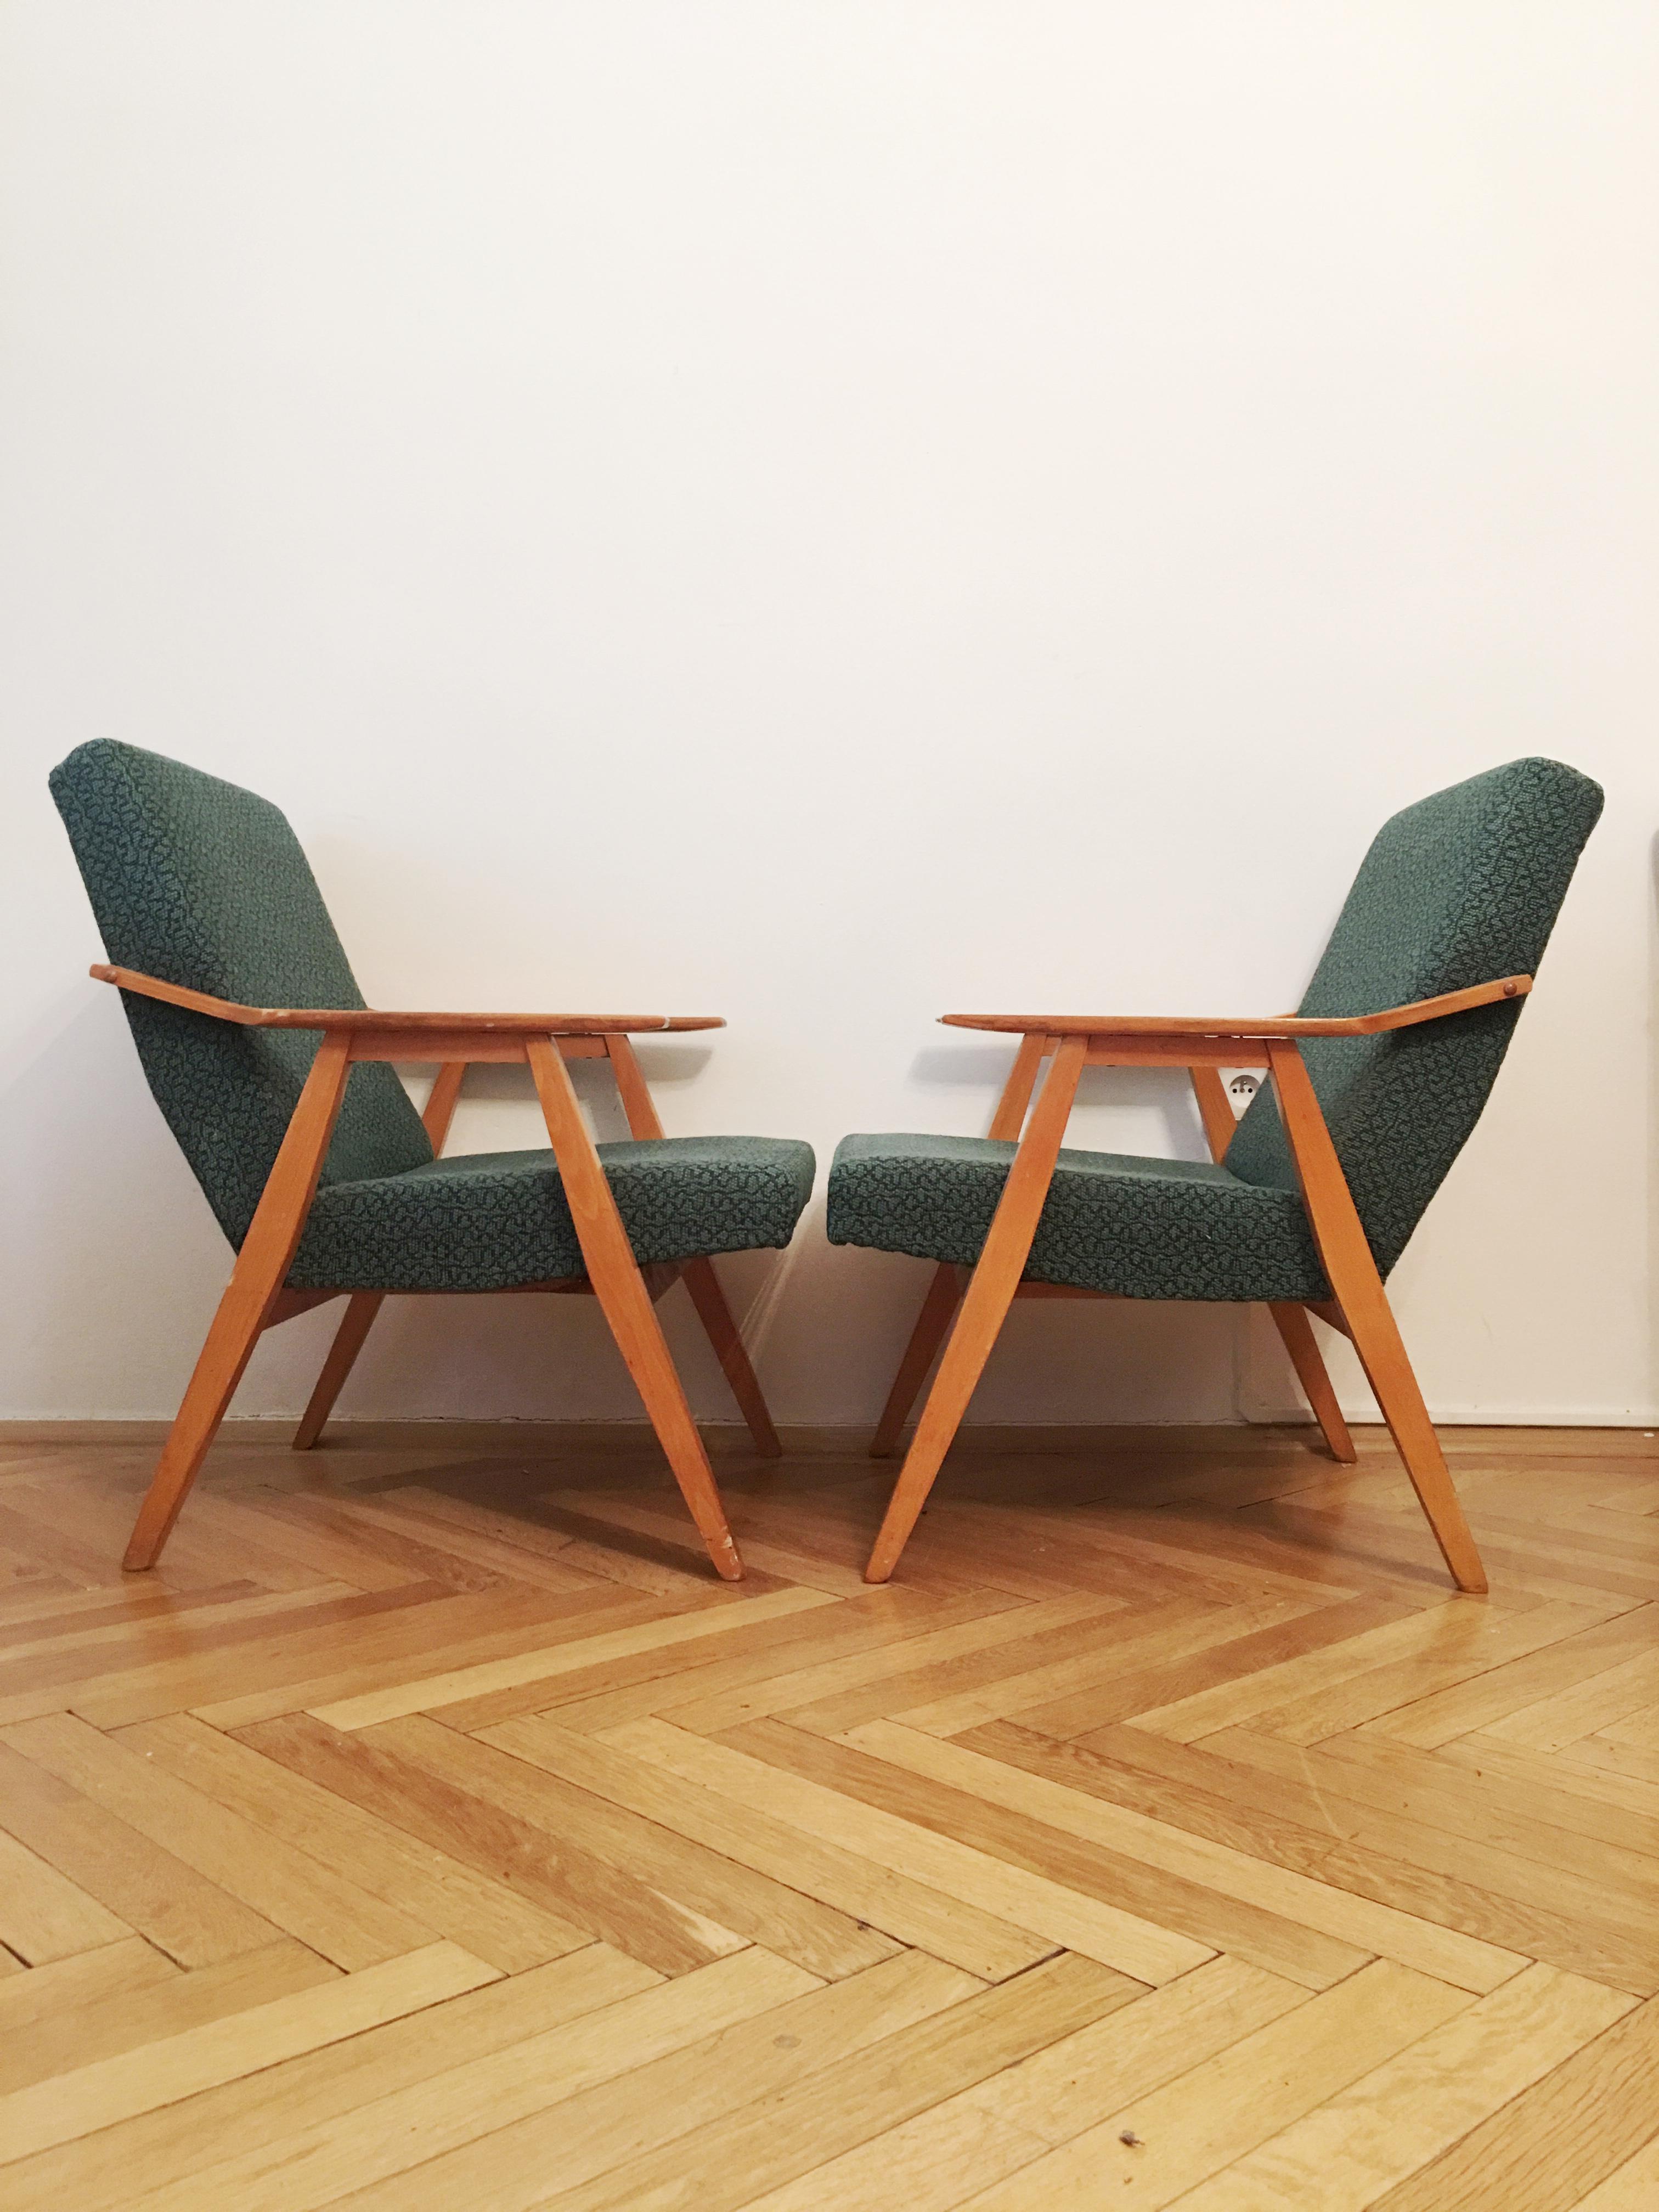 Like a brand new – armchairs made in Czechoslovakia in 1960s.
2 pieces
Dimensions: 59 × 78 × 74 cm (W × H × D).

